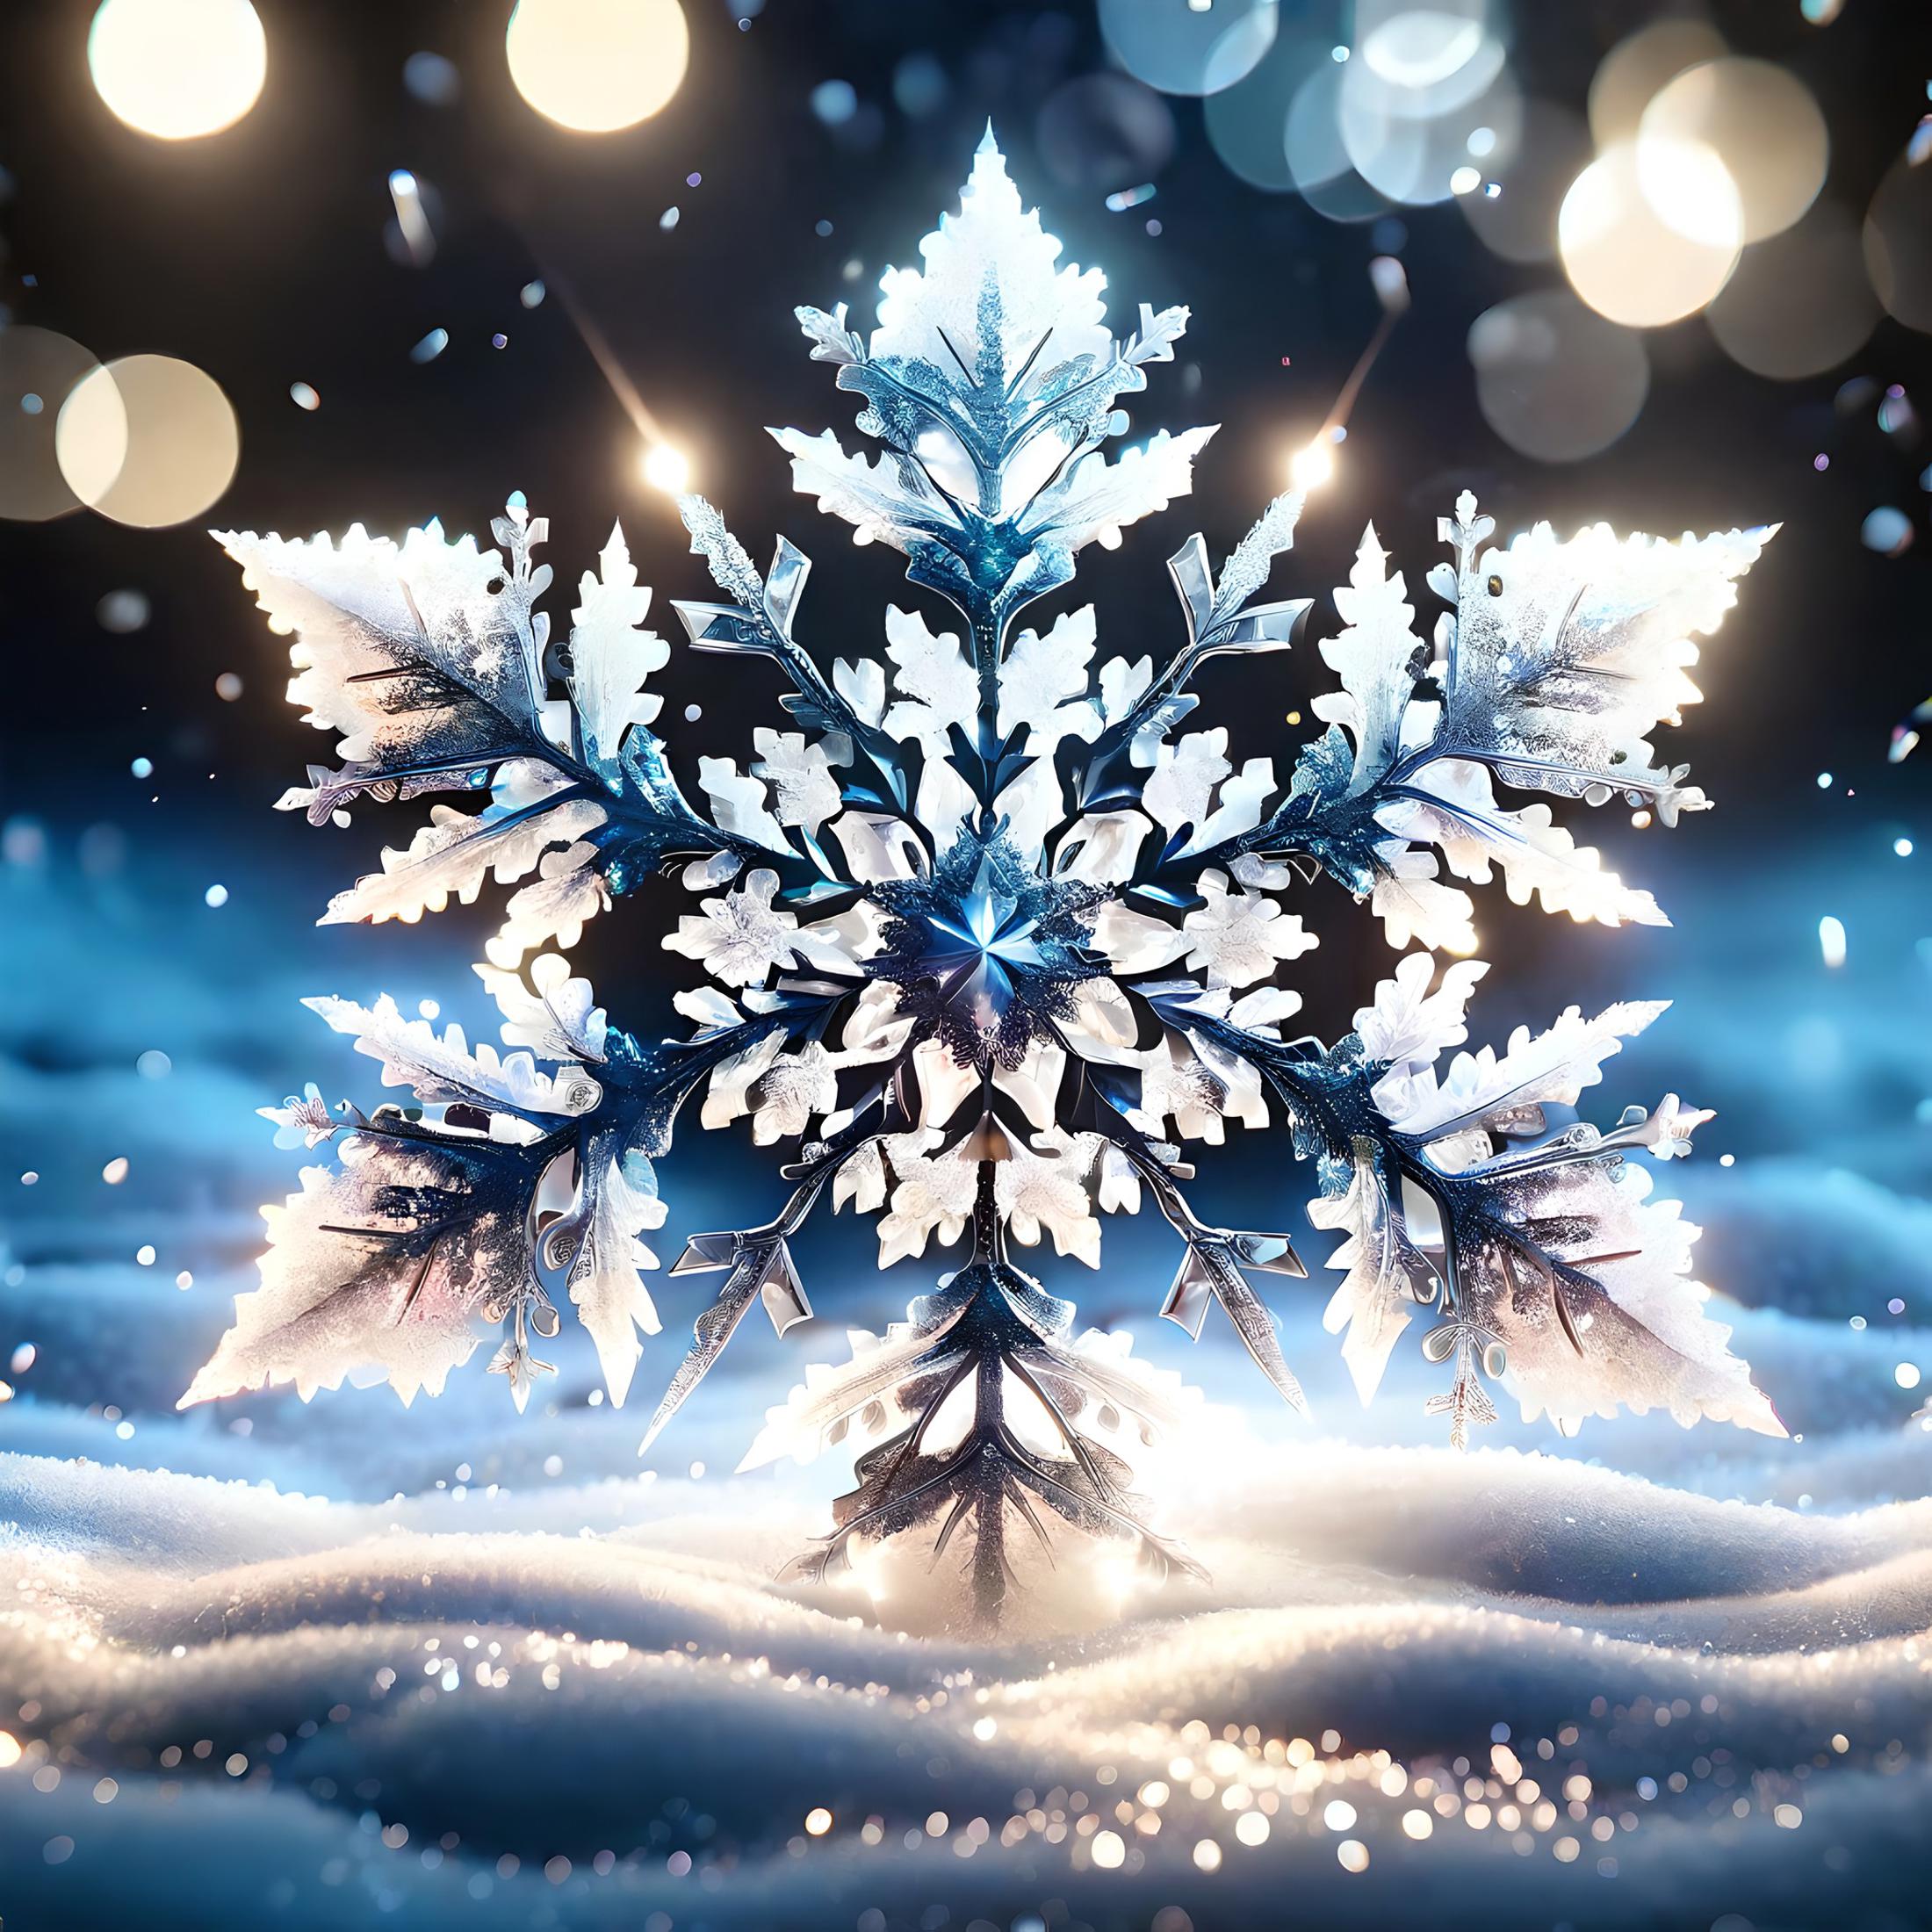 A beautifully detailed snowflake against a black background.